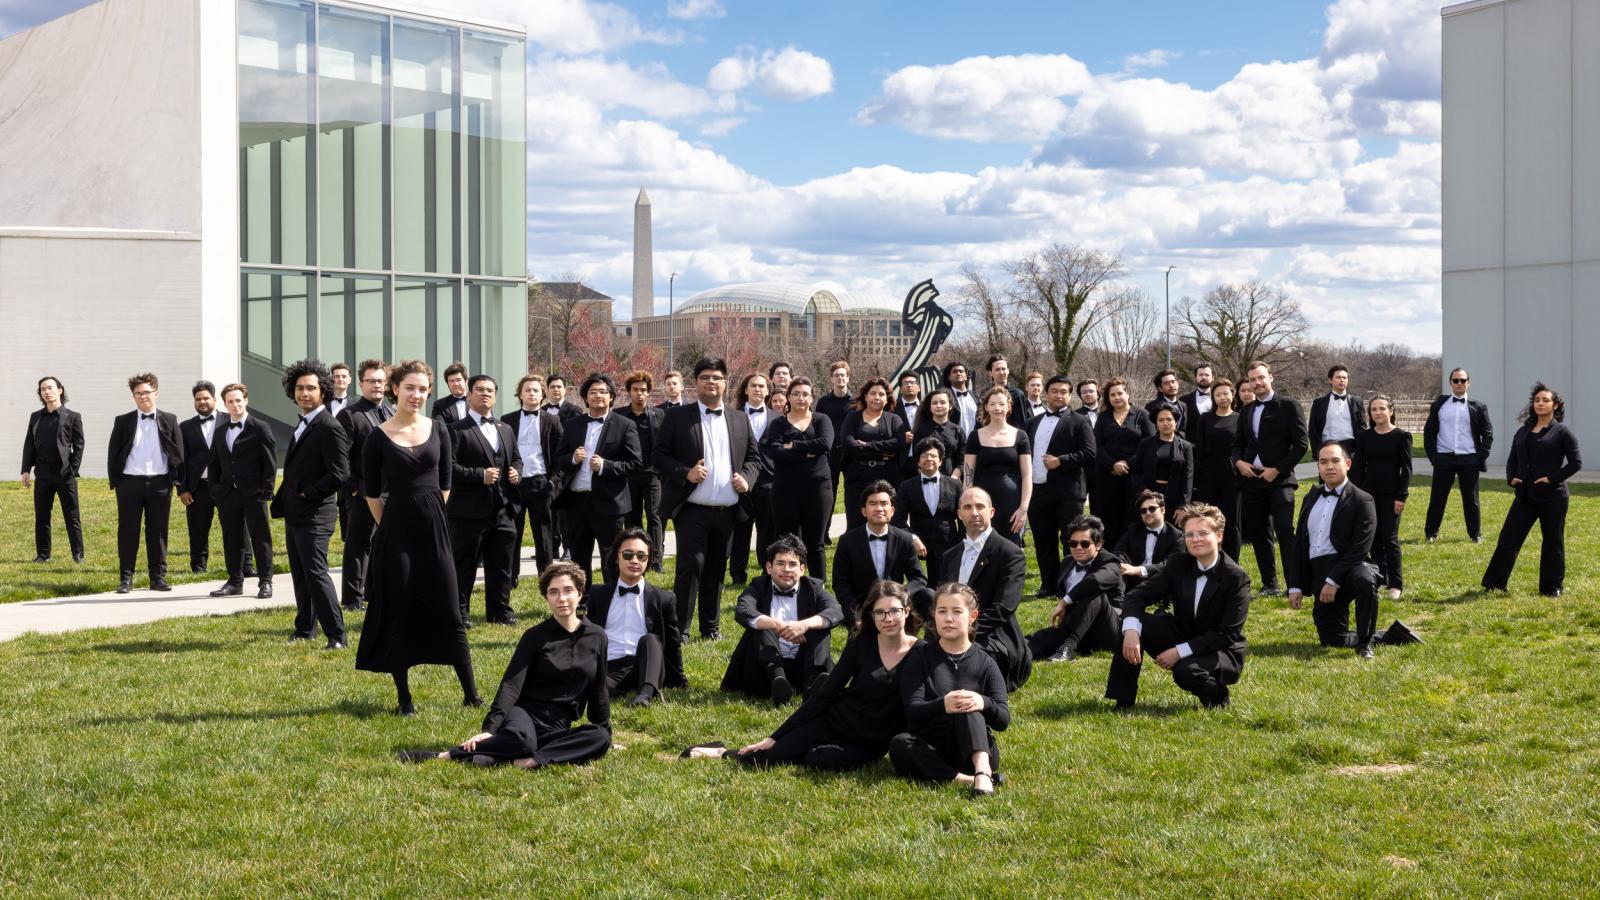 ɫ Wind Symphony Members pose on a grass lawn in Washington D.C.